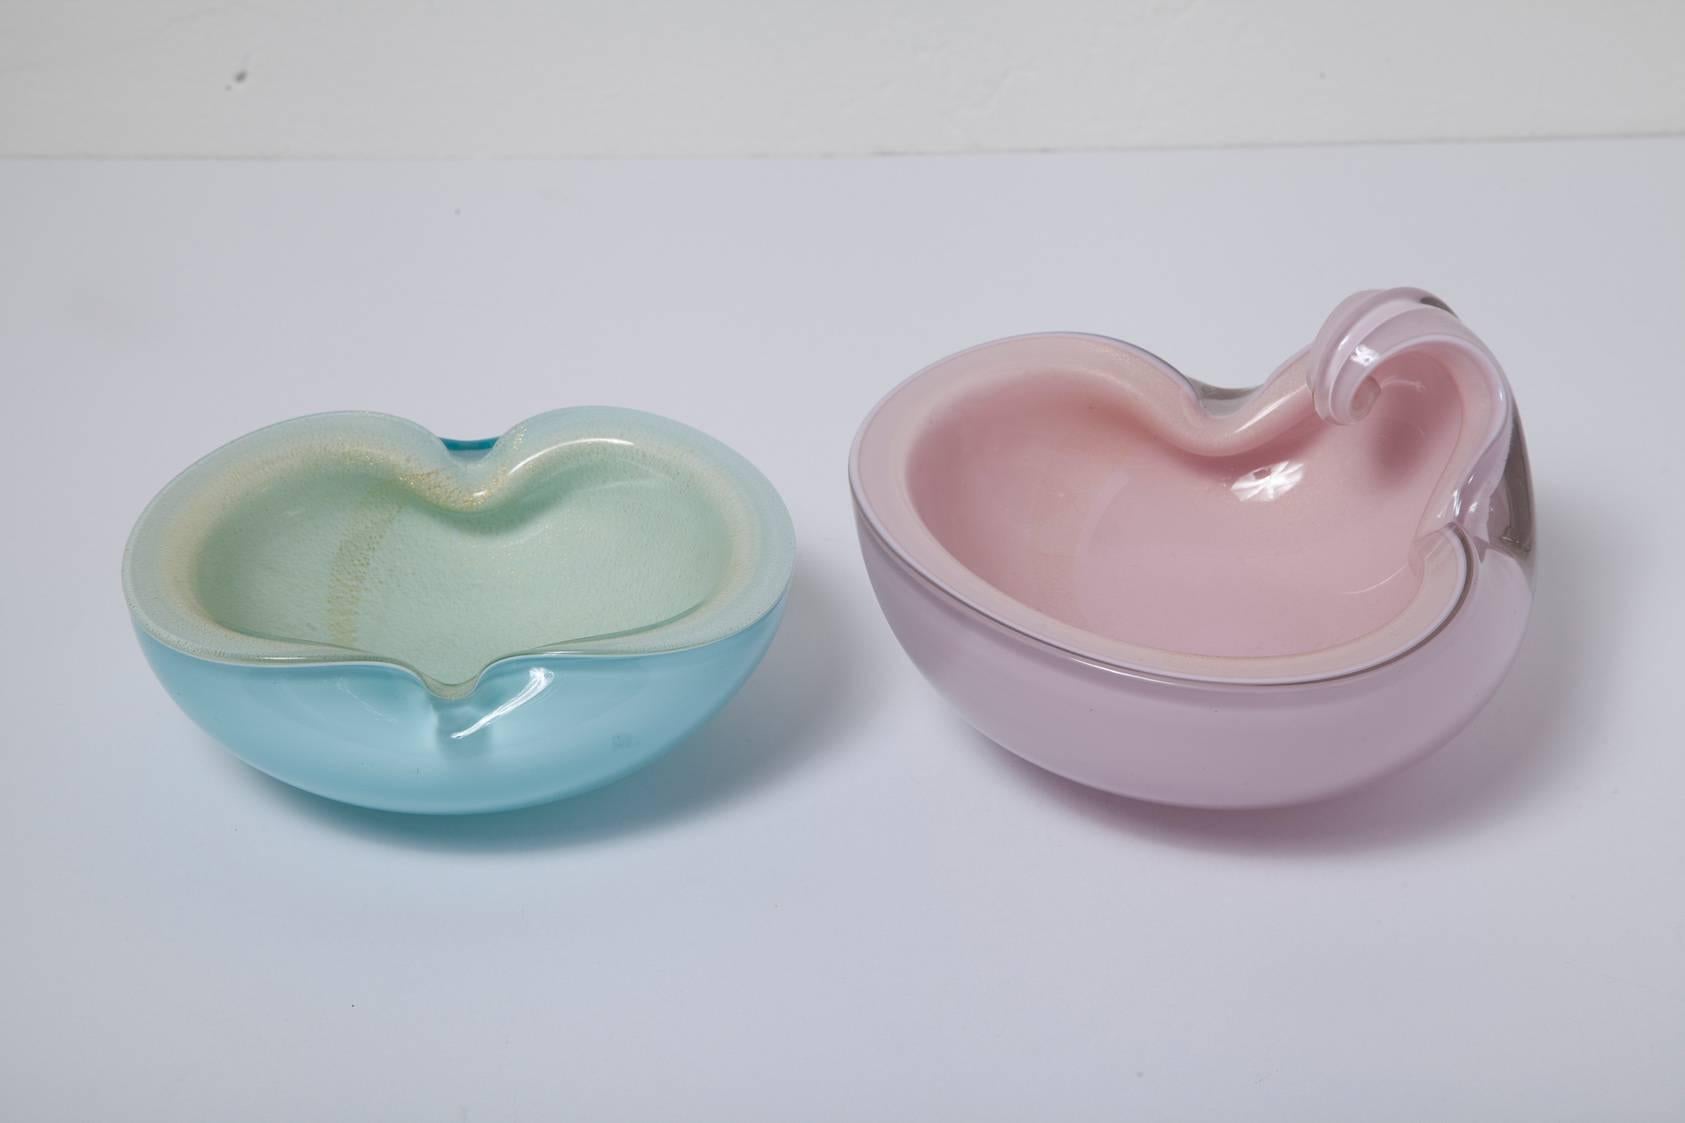 Perfect for holiday gift giving two 1950s Murano glass bowls by Barbini. The first is gold dusted pale pink cased in clear glass and measures H 3.75 in. x W 7 in. x D 6.75 in. The second is gold dusted white cased in pale blue glass and measures H